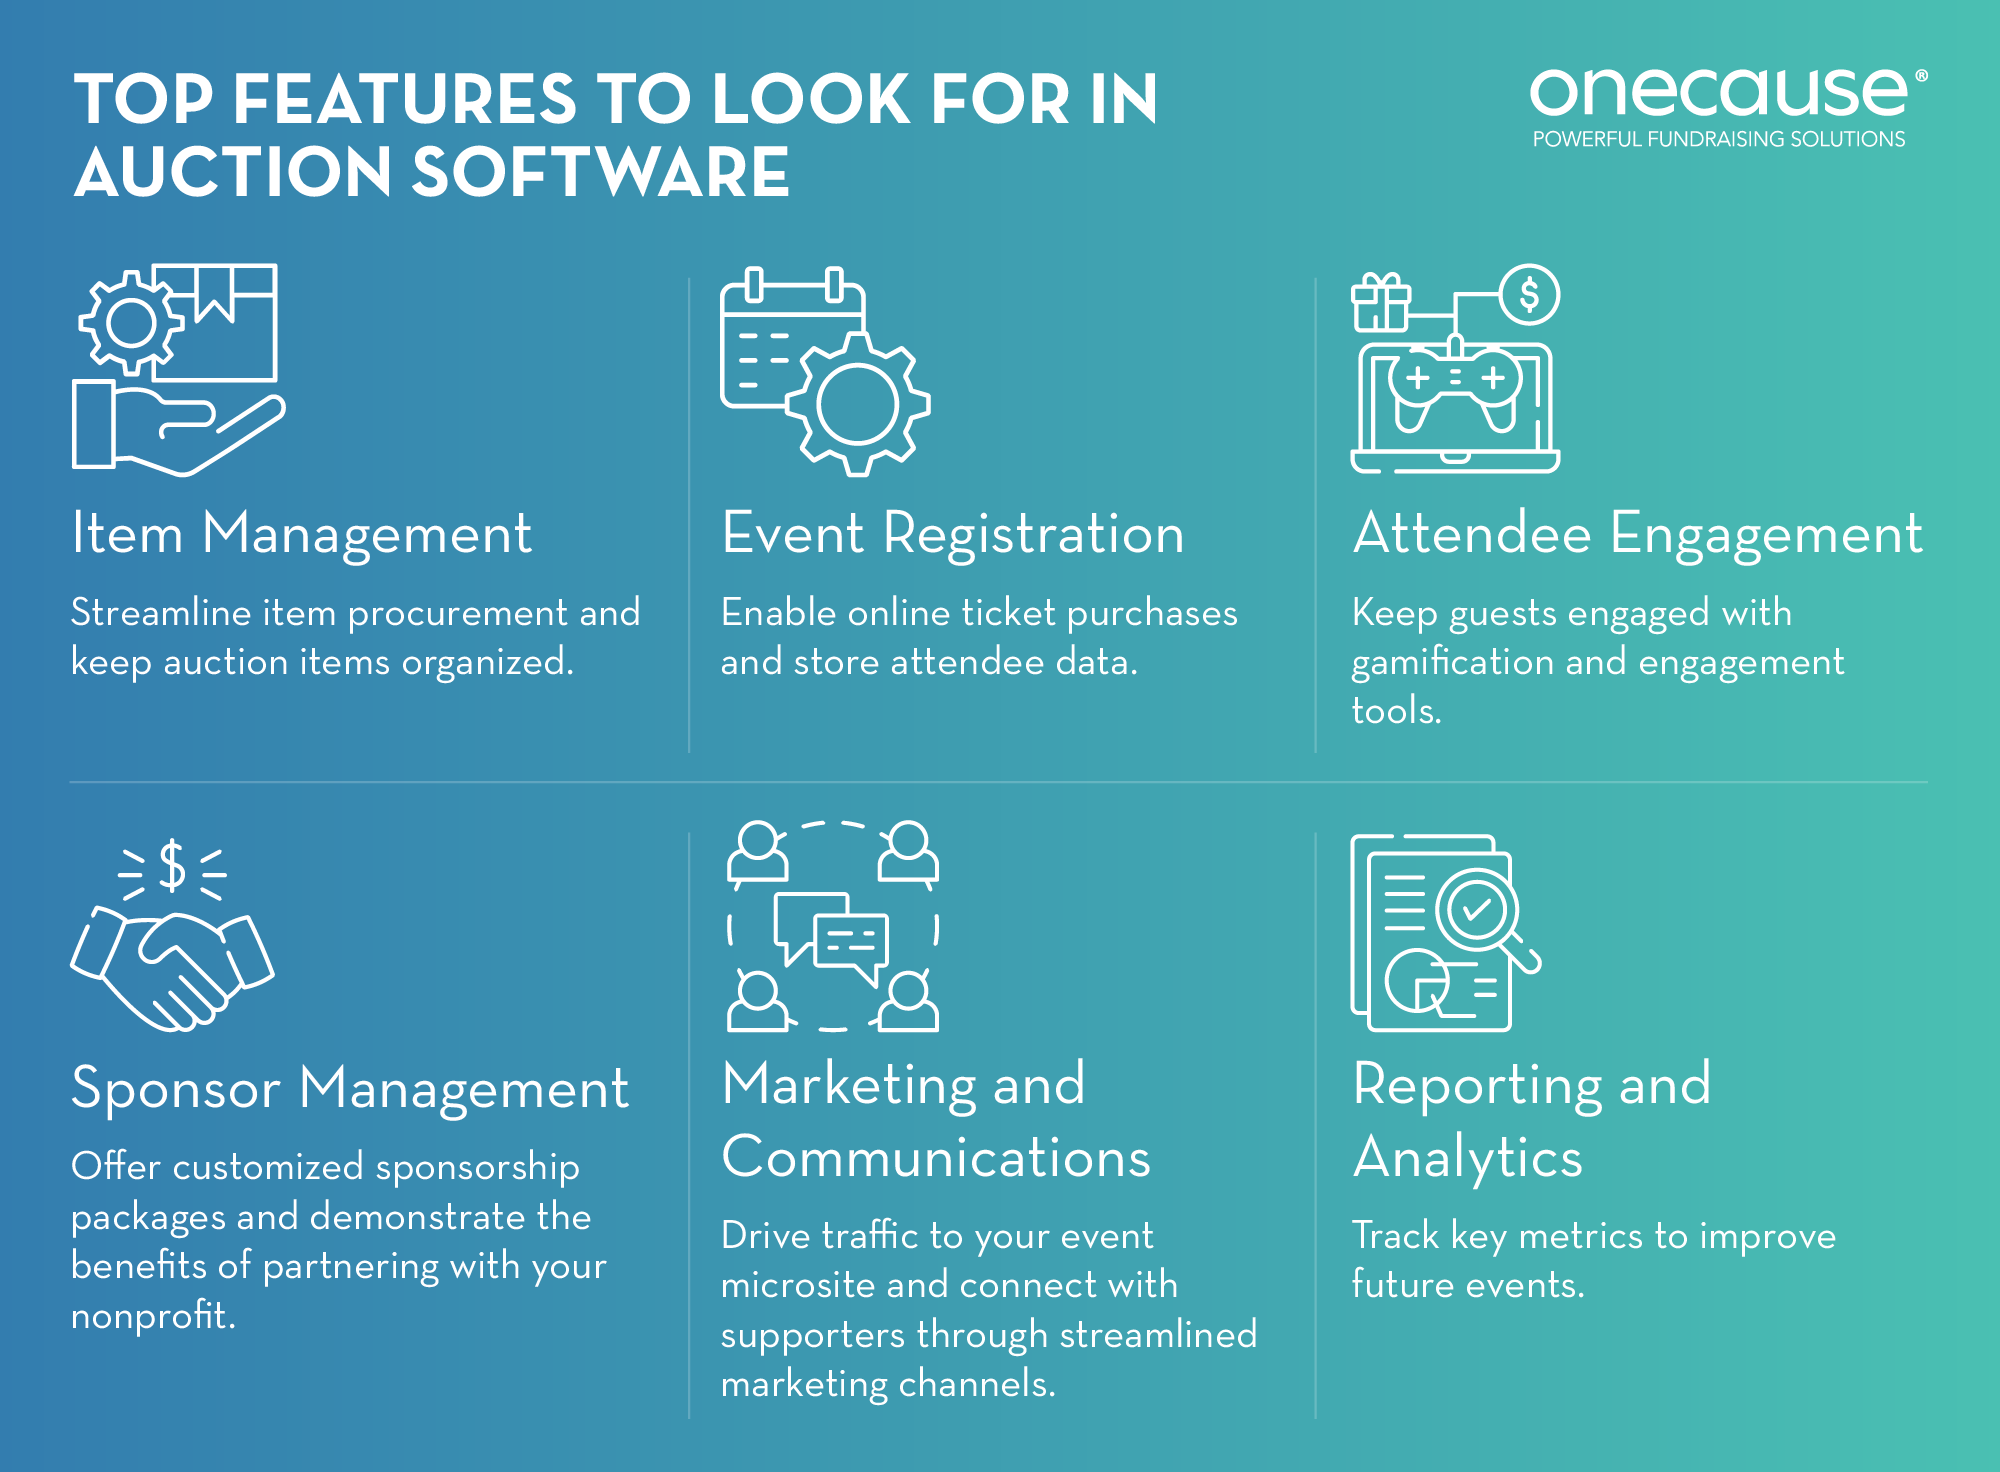 This image lists the key features that OneCause, the top online charity auction software, providers. These features are also discussed in the text below.